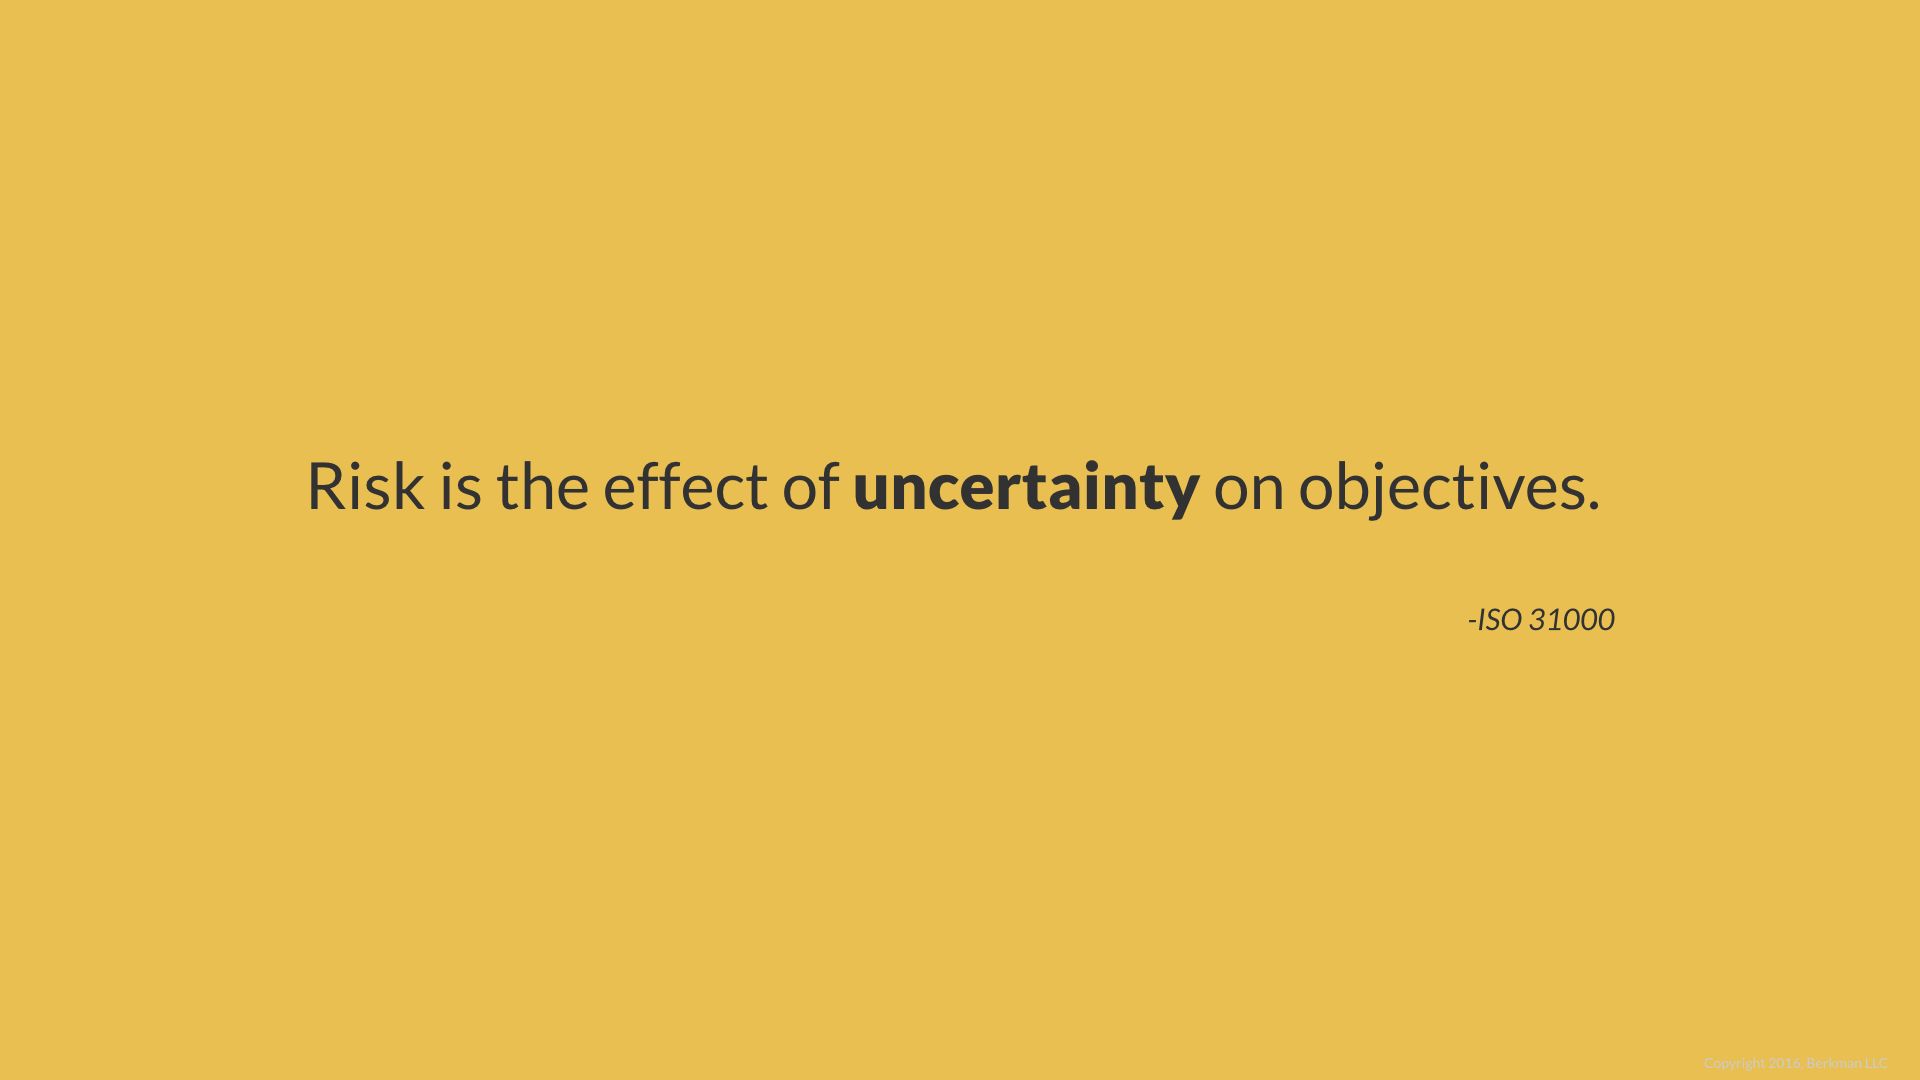 Risk is the effect of uncertainty on objectives